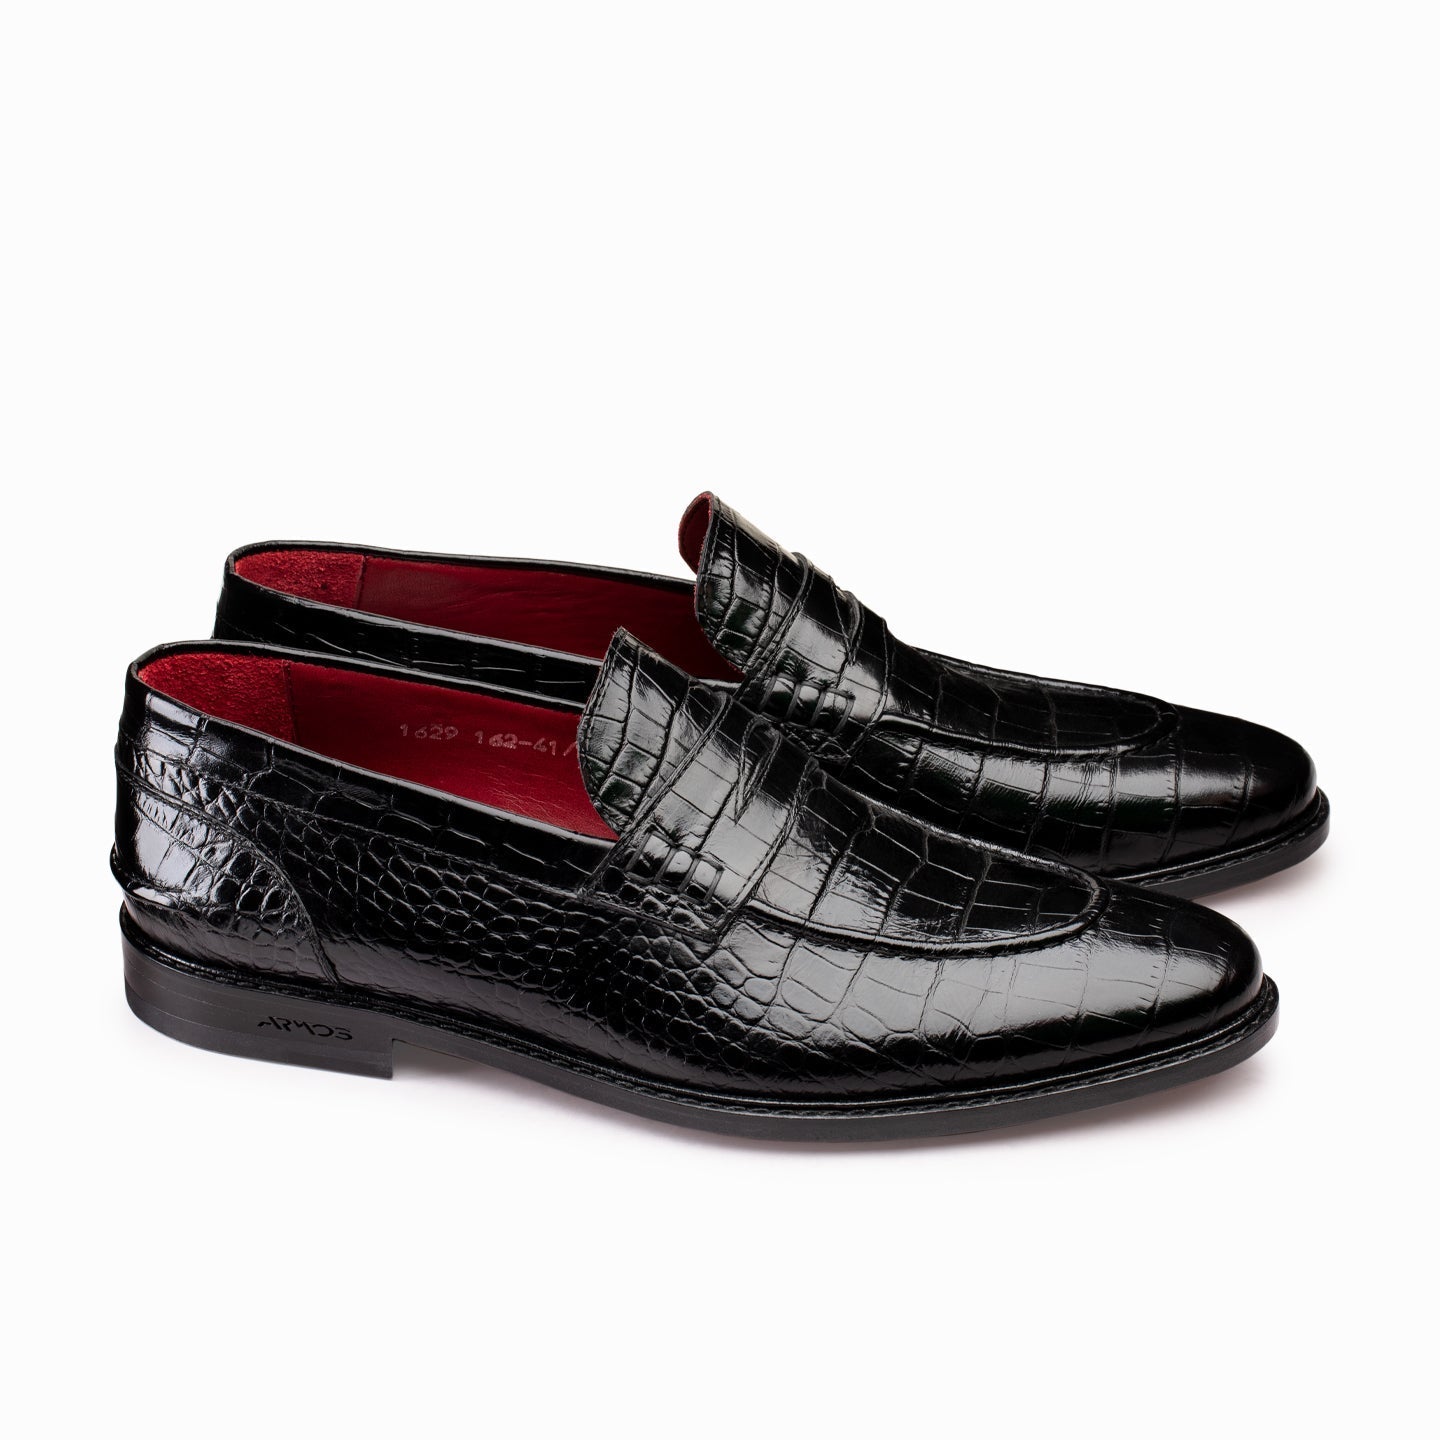 Luxury loafers